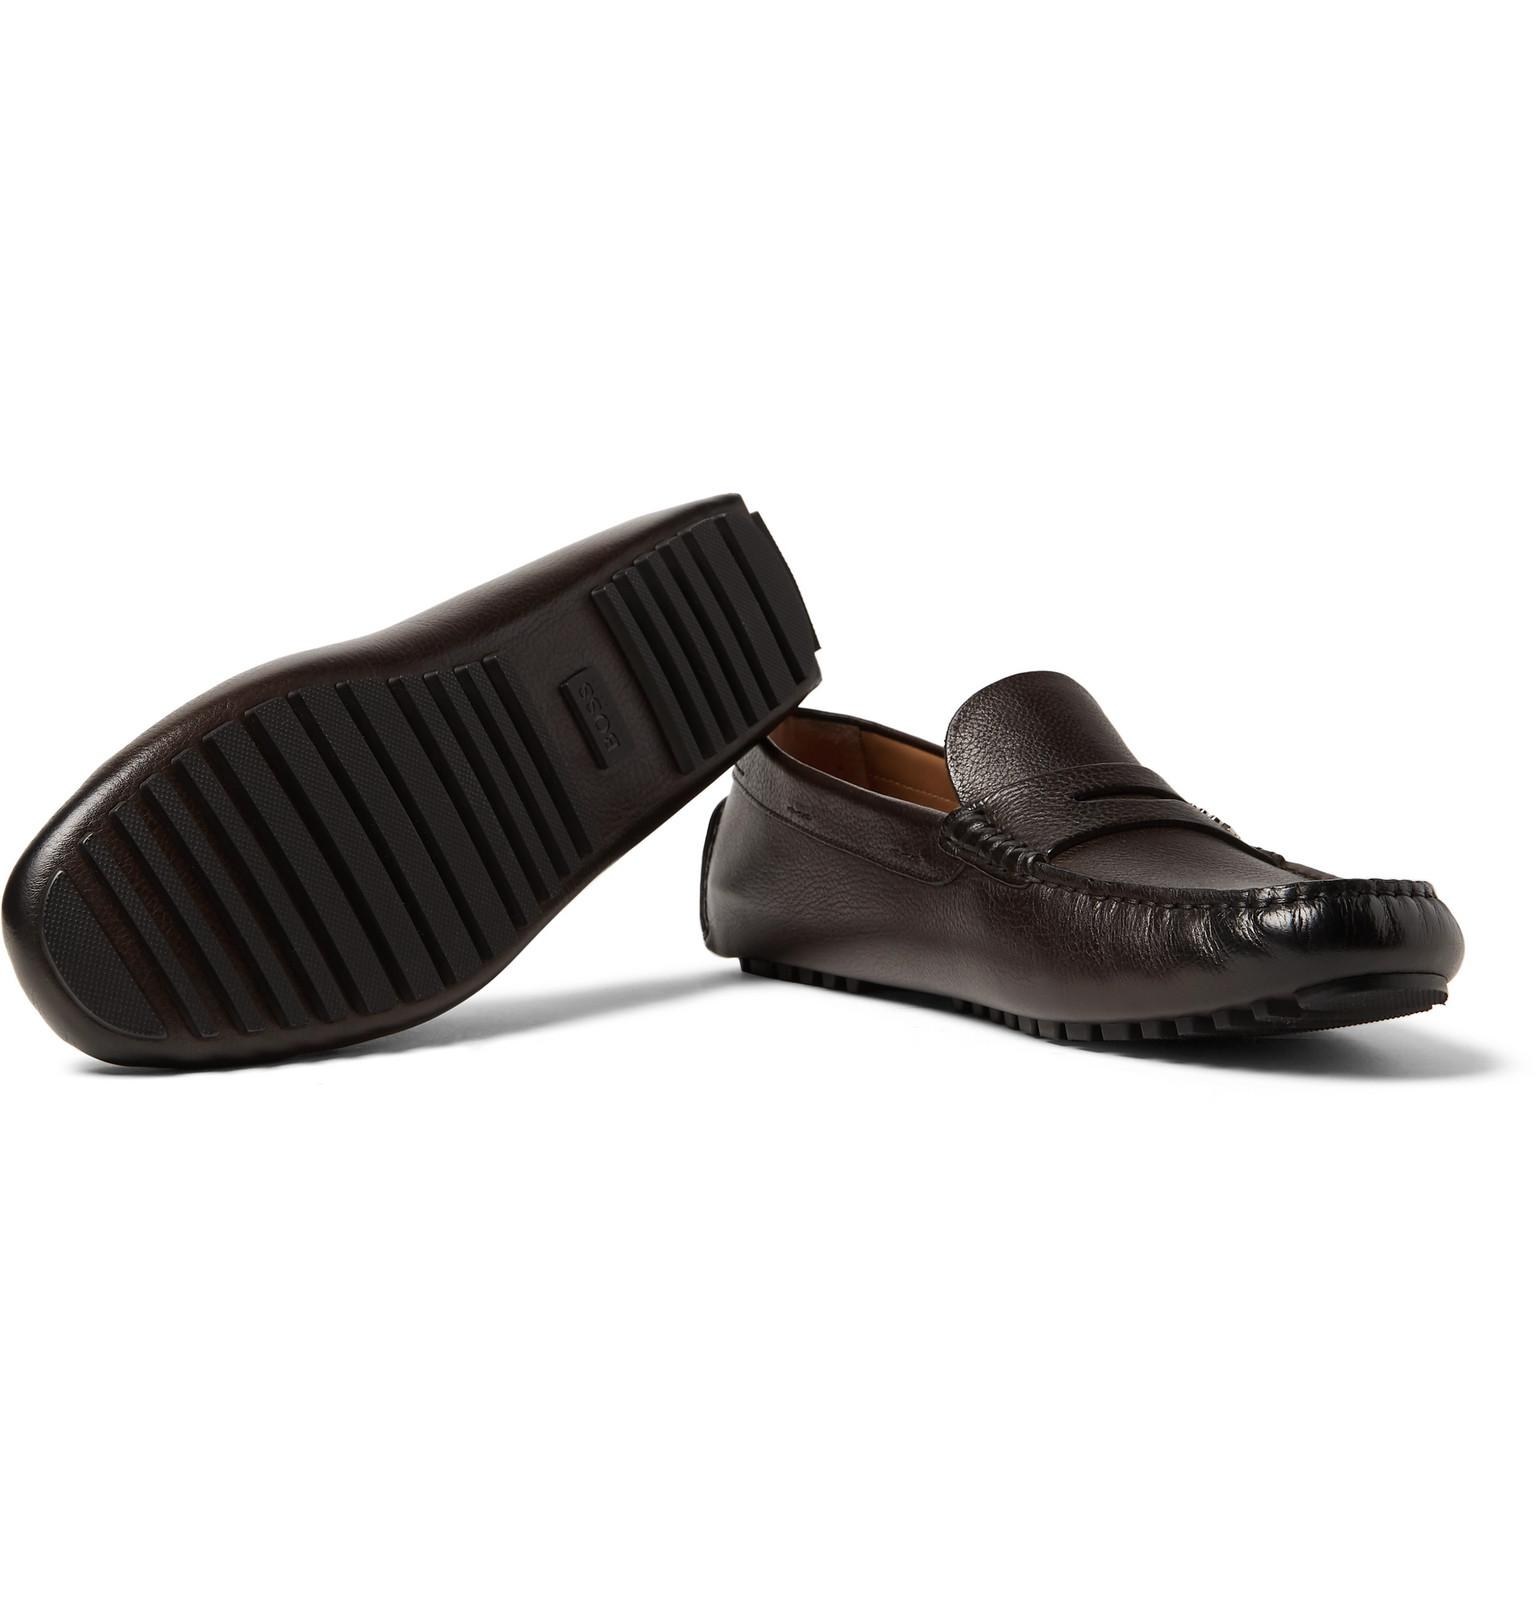 BOSS by Hugo Boss Leather Driving Shoes in Brown for Men - Lyst